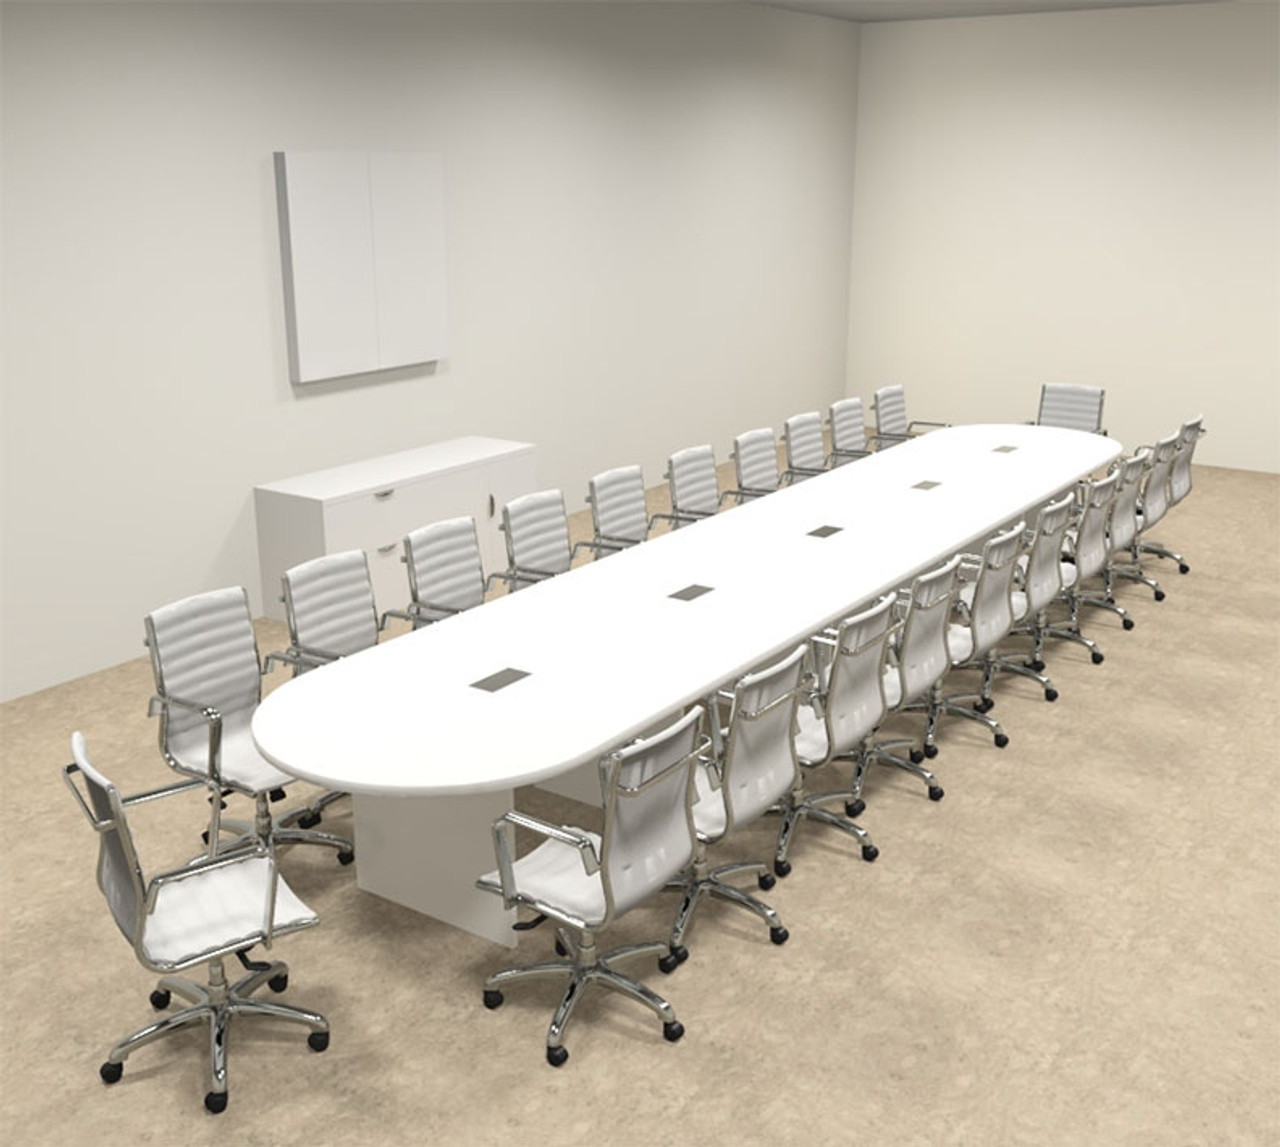 Modern Racetrack 22' Feet Conference Table, #OF-CON-C117